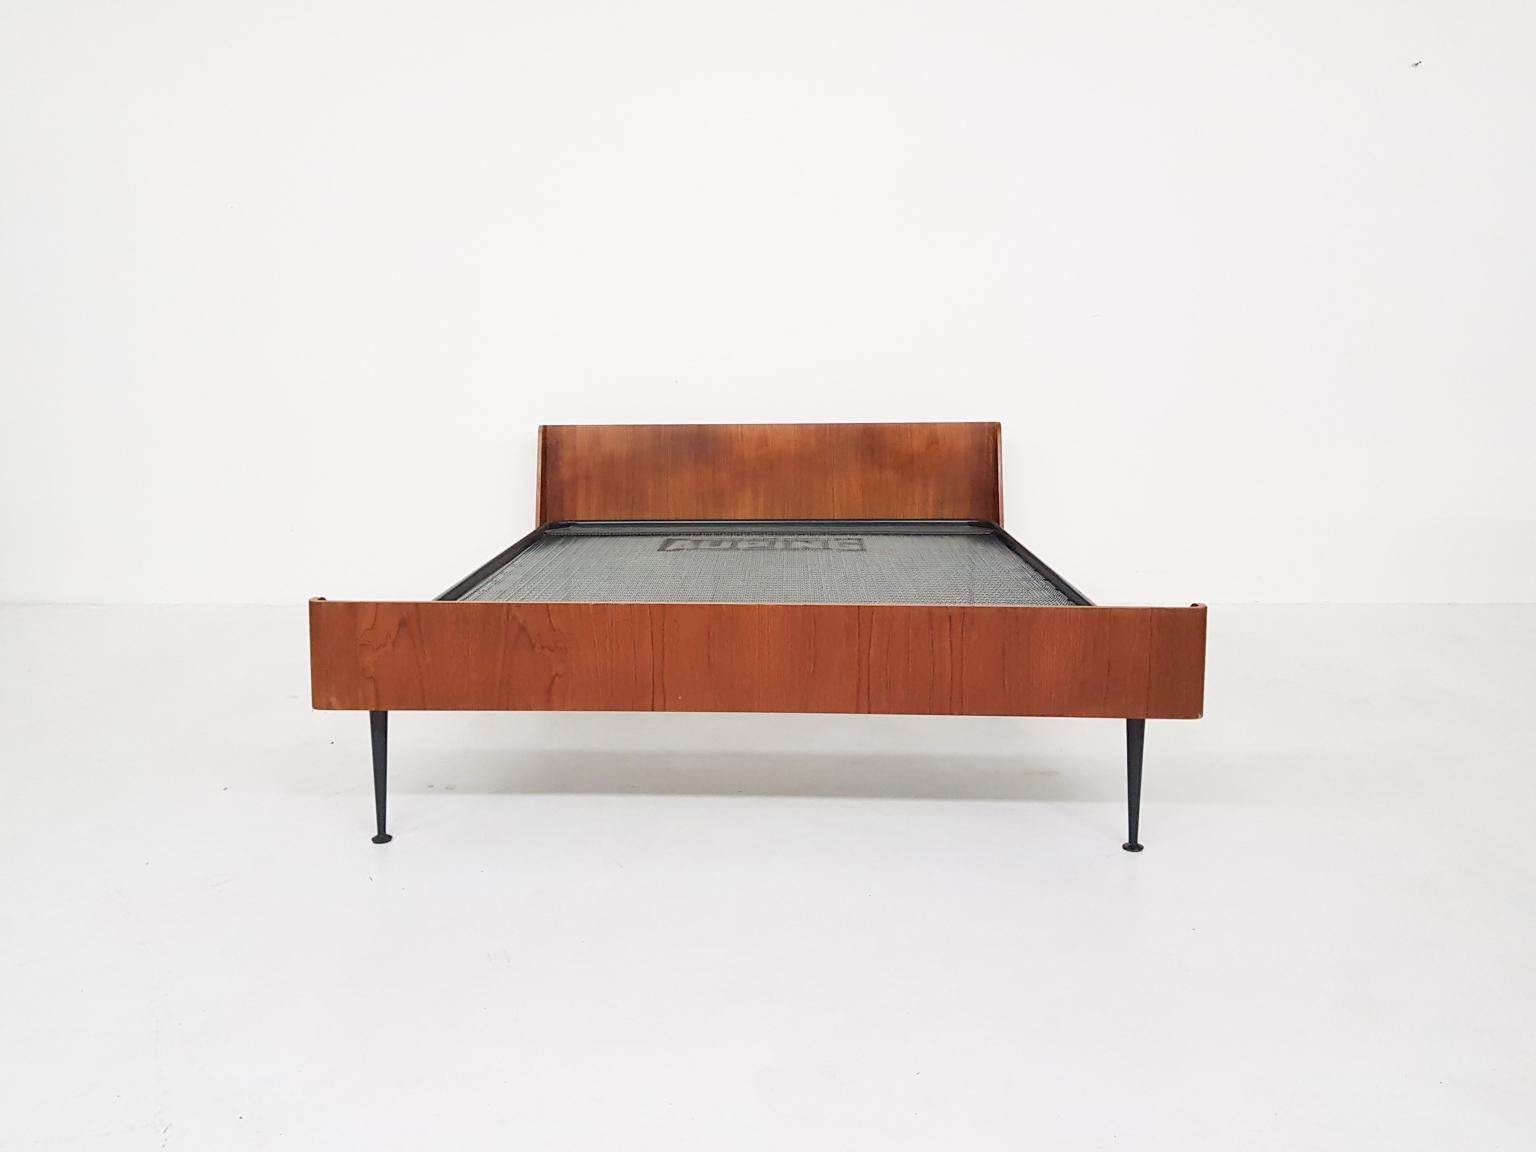 One of the most iconic midcentury design beds from the Netherlands: the 